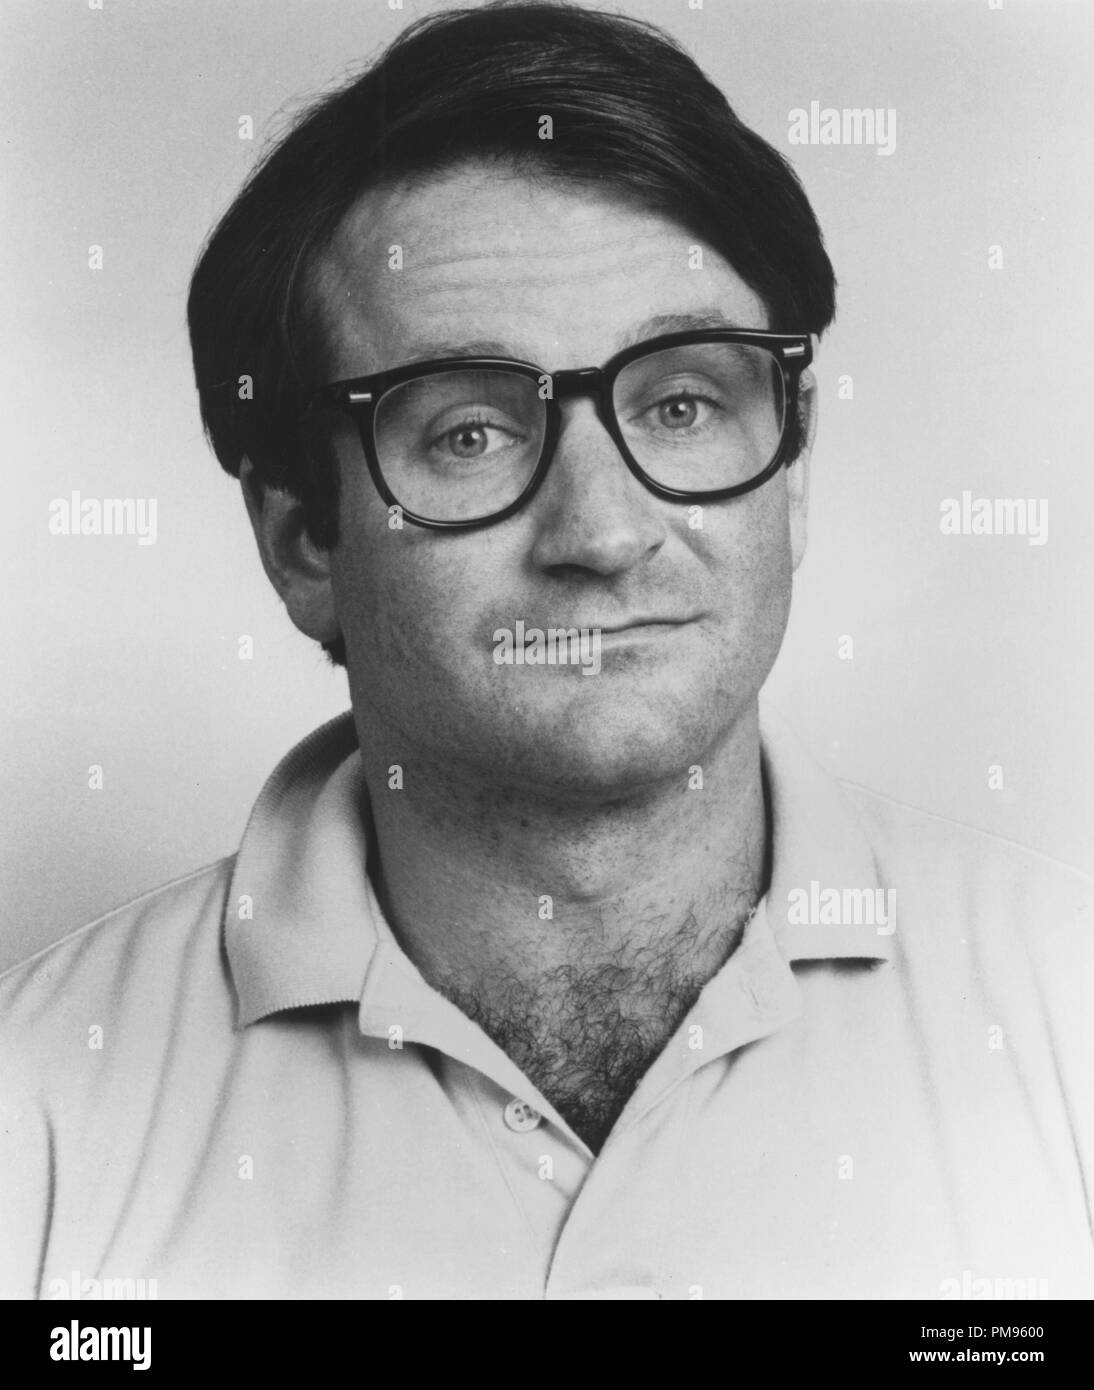 Studio Publicity Still from "Best of Times" Robin Williams © All Reserved File Reference # 31700334THA For Editorial Use Only Stock Photo - Alamy